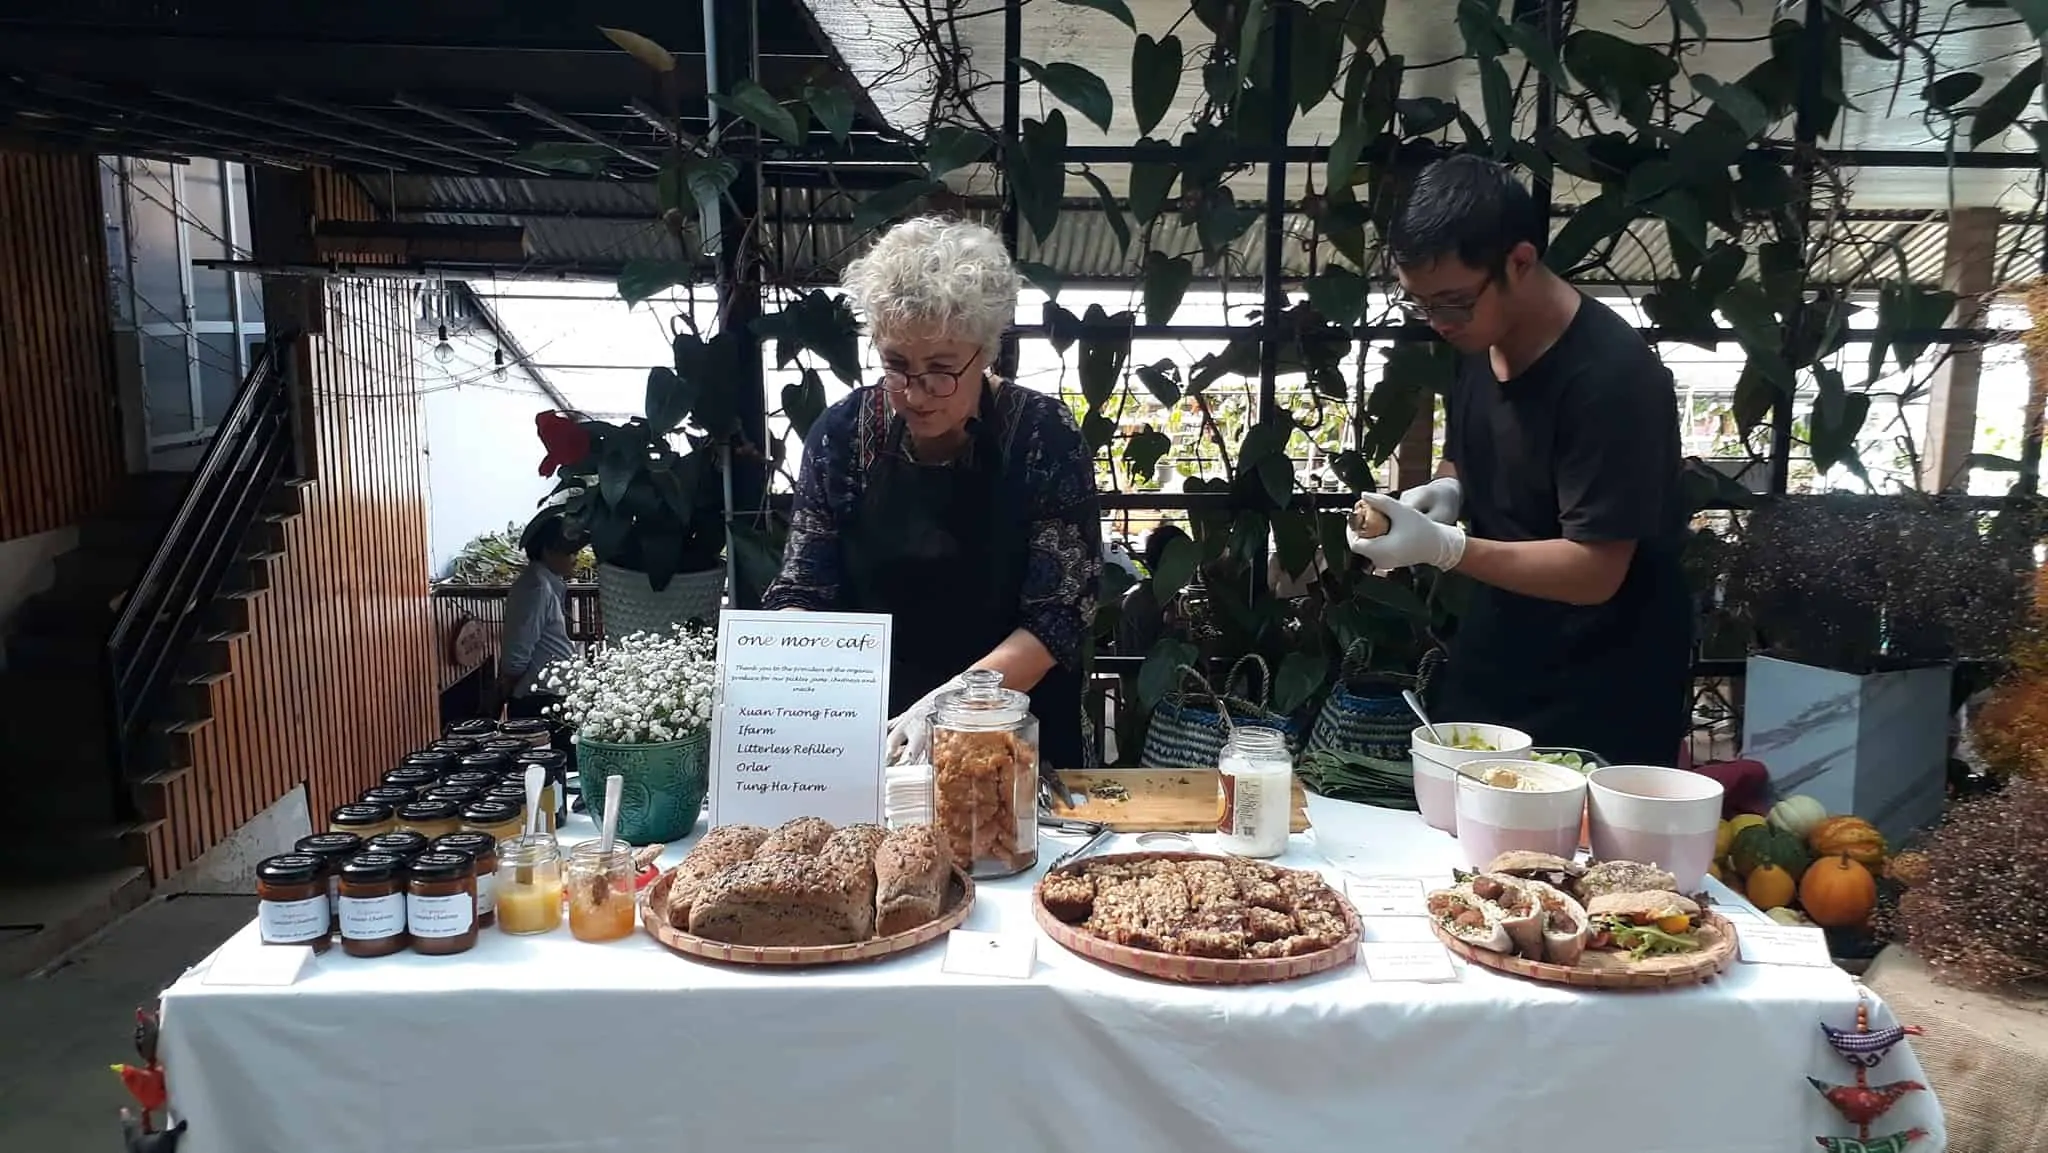 Delicious Mediterranean snacks, chutney, jams and pickles from One More Cafe at the Organic farmer's market in Dalat, Vietnam